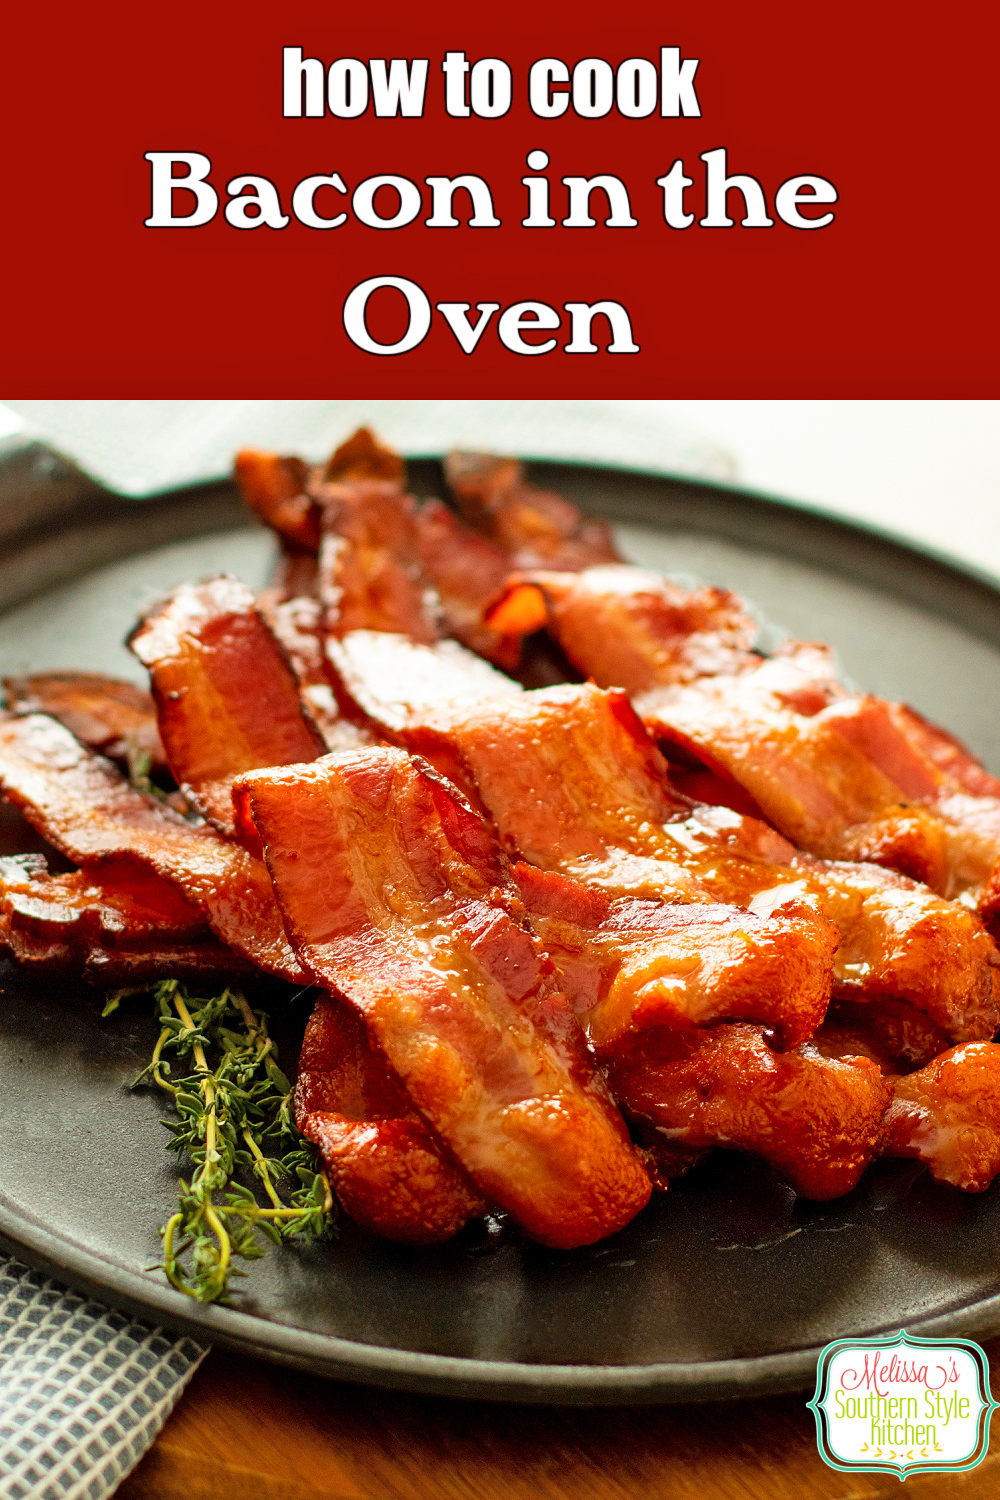 This simple technique showing you How to Cook Bacon in the Oven is one that you'll return to over and over again. #bacon #bakedbacon #howtocookbaconintheoven #ovenfriedbacon #easybaconrecipes #baconrecipes via @melissasssk